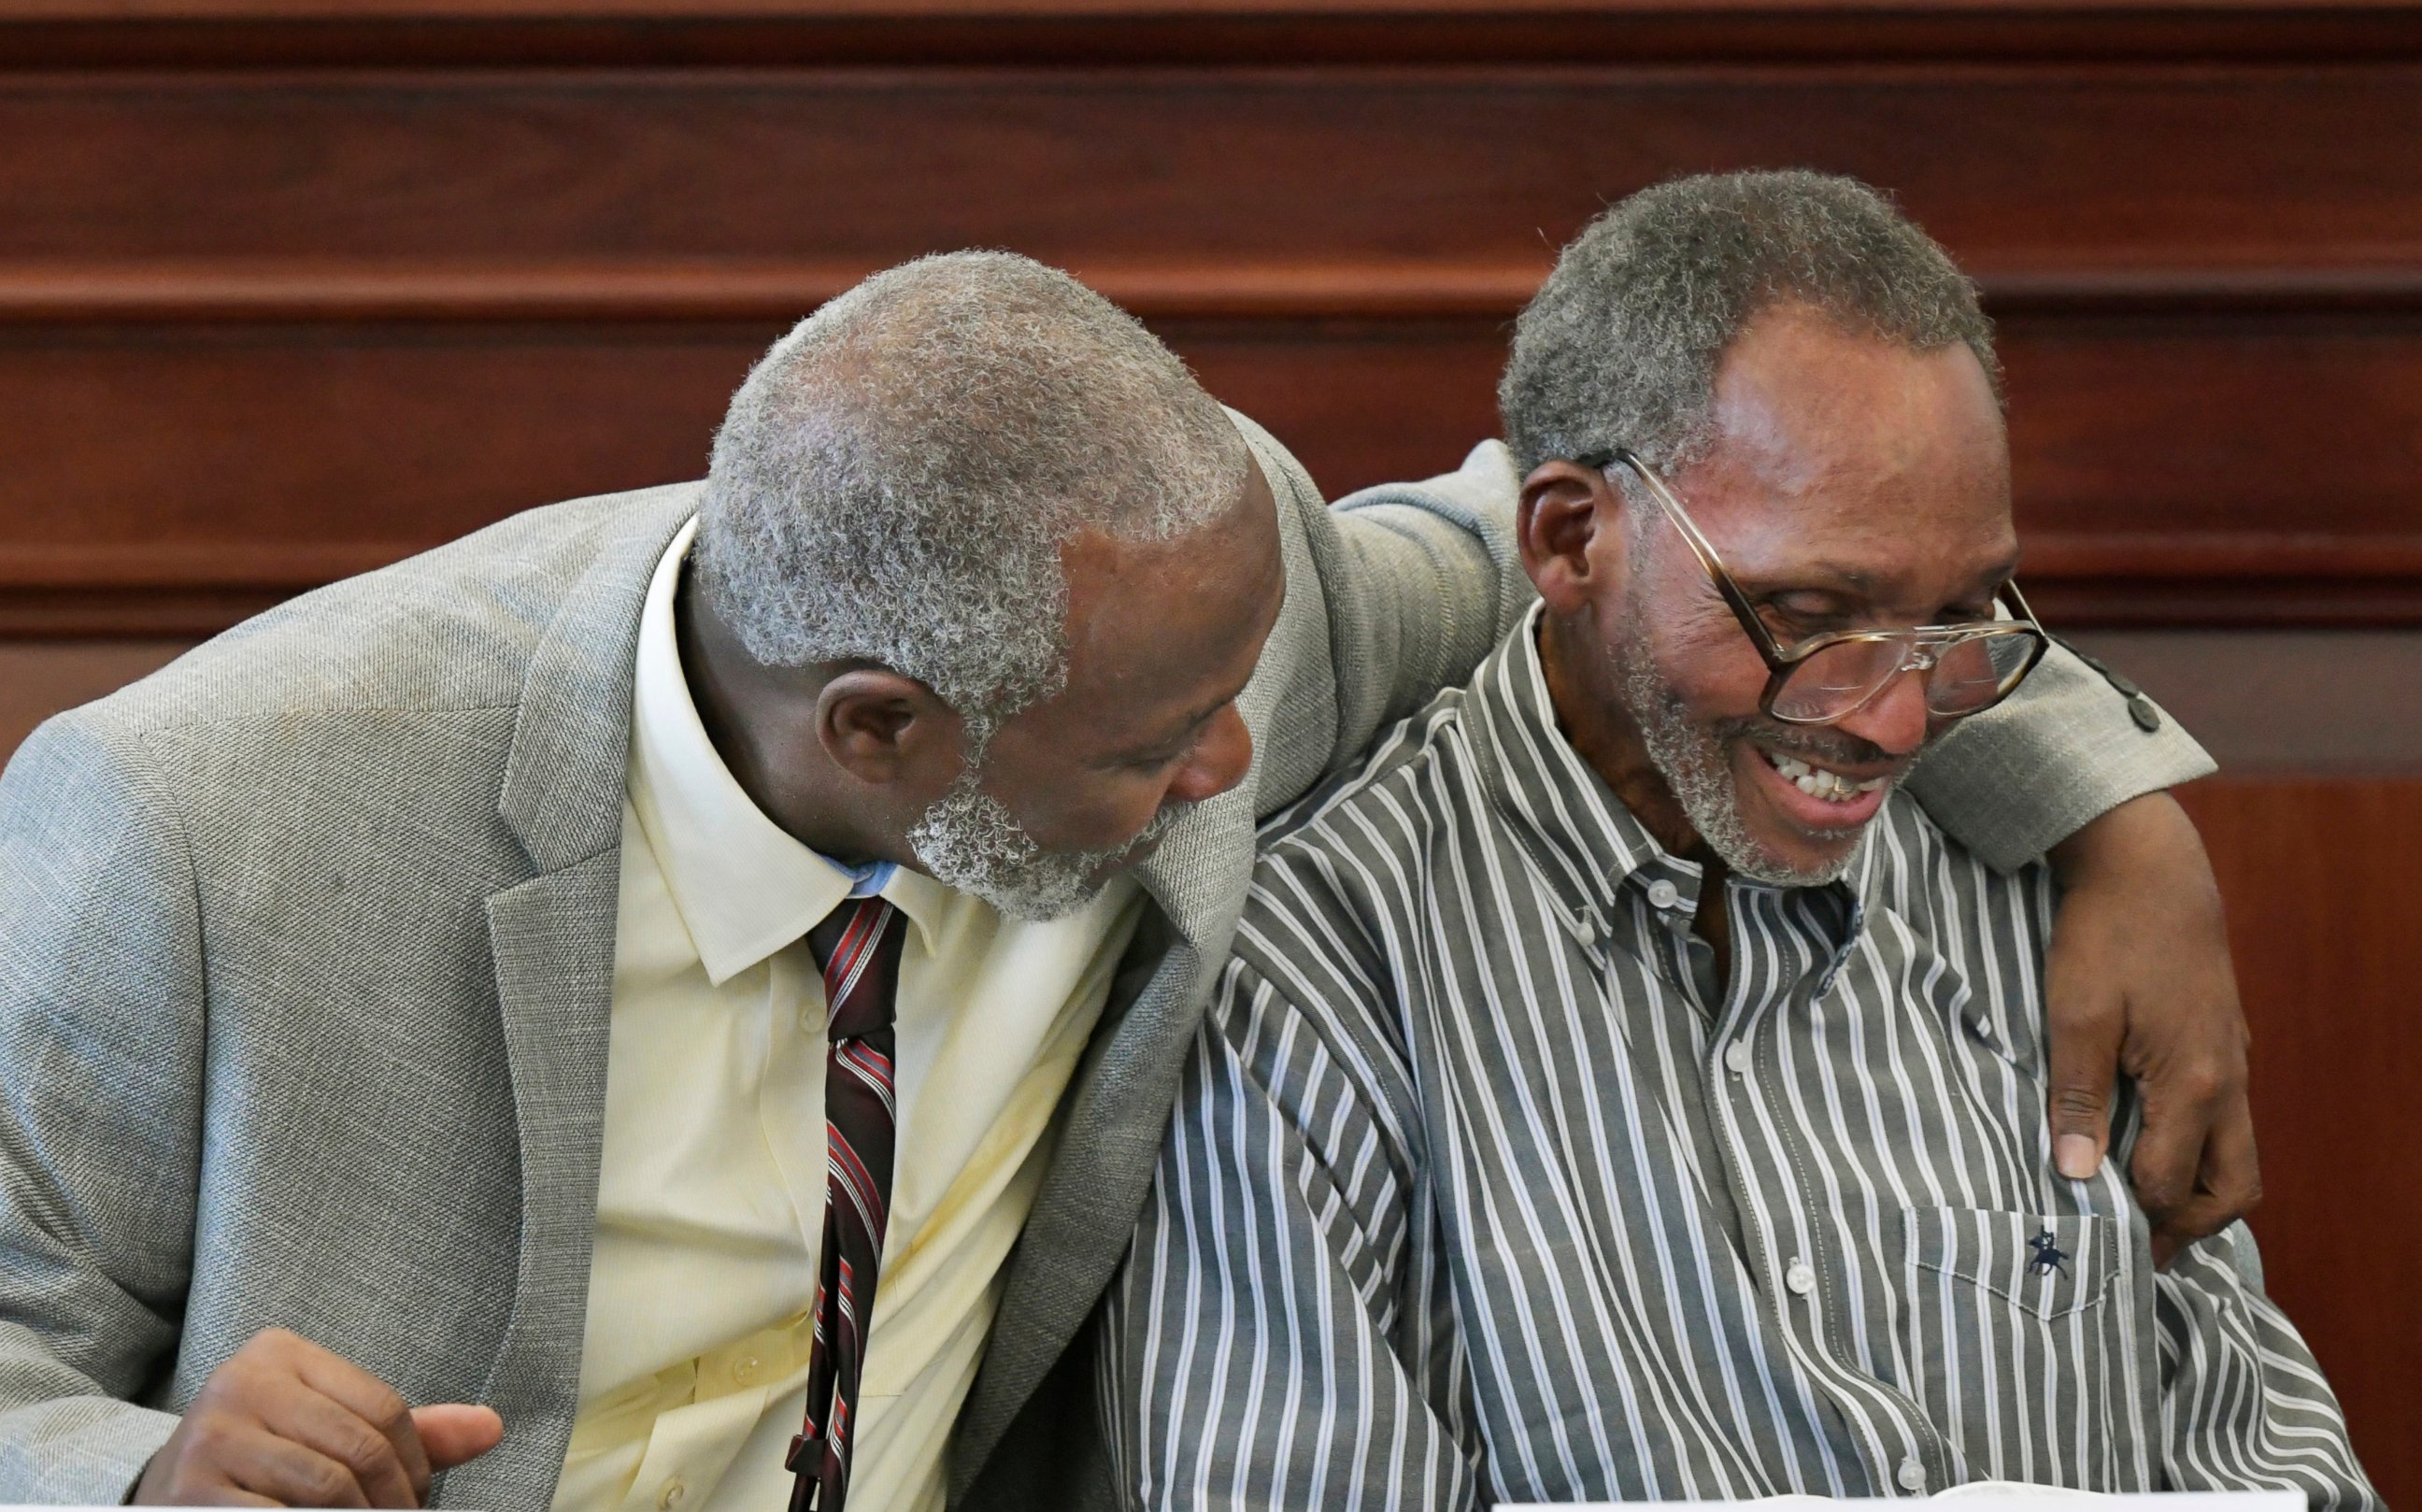 PHOTO: Nathan Myers, left, hugs his uncle, Clifford Williams, during a news conference after their 1976 murder convictions were overturned Thursday, March 28, 2019 in Jacksonville, Fla.